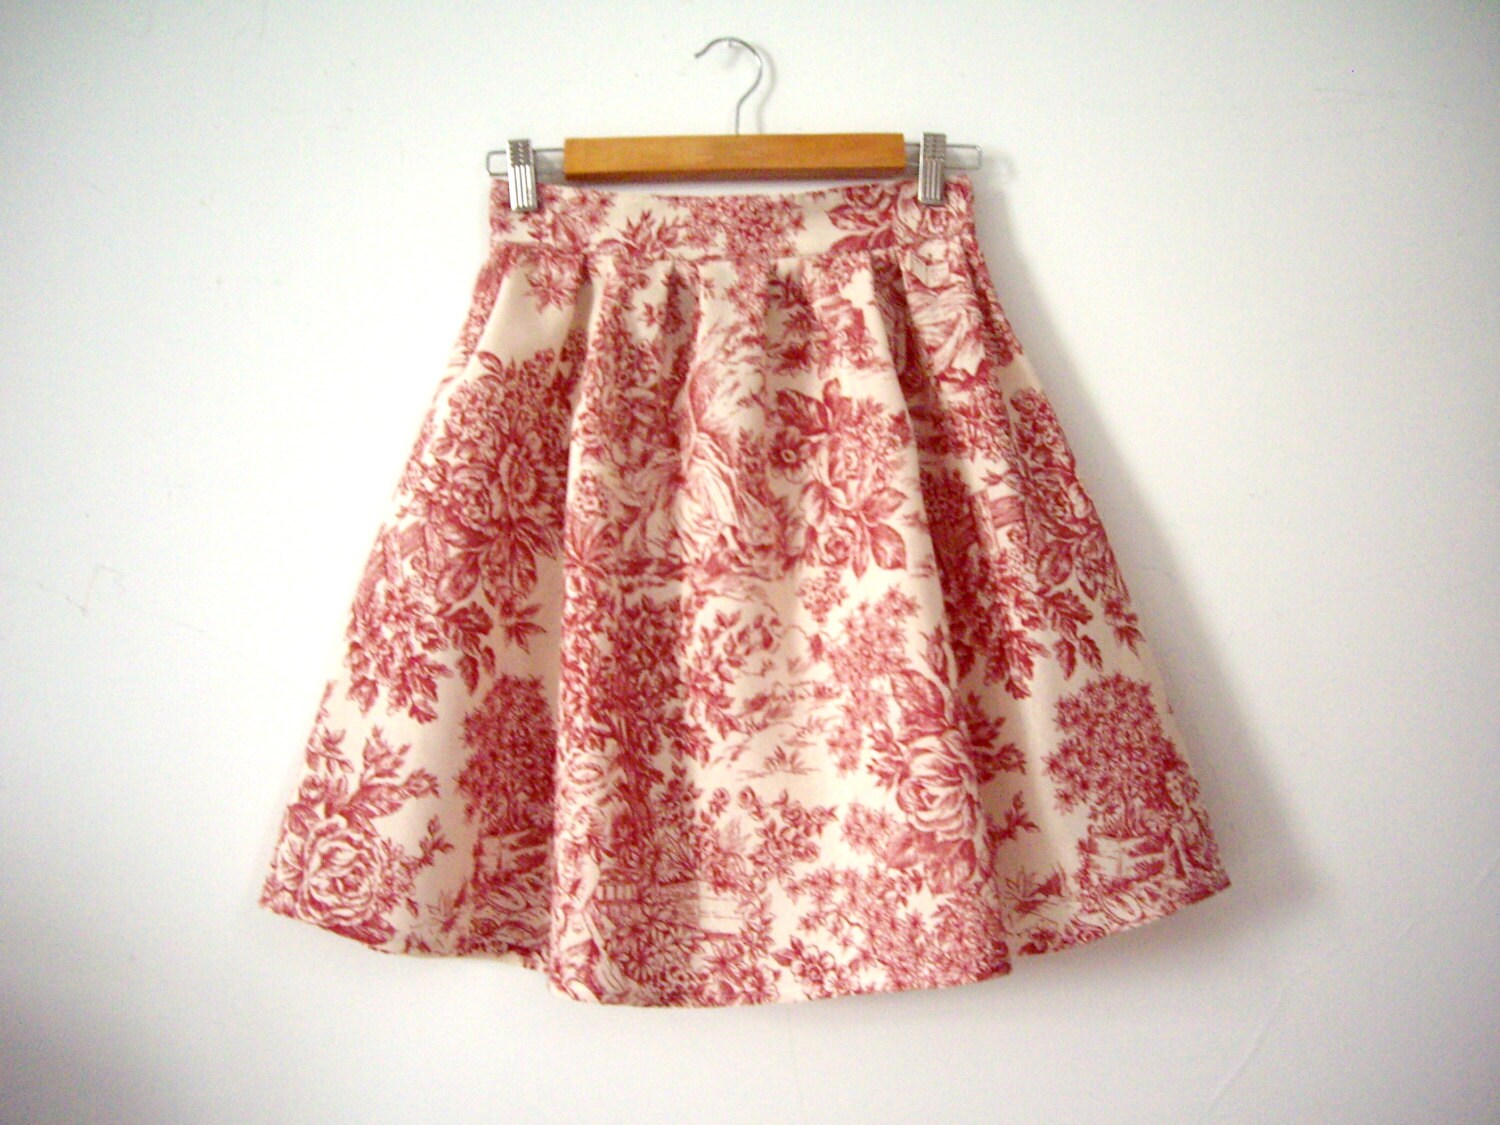 Flared Skirt Red Toile de Jouy Cotton Voile